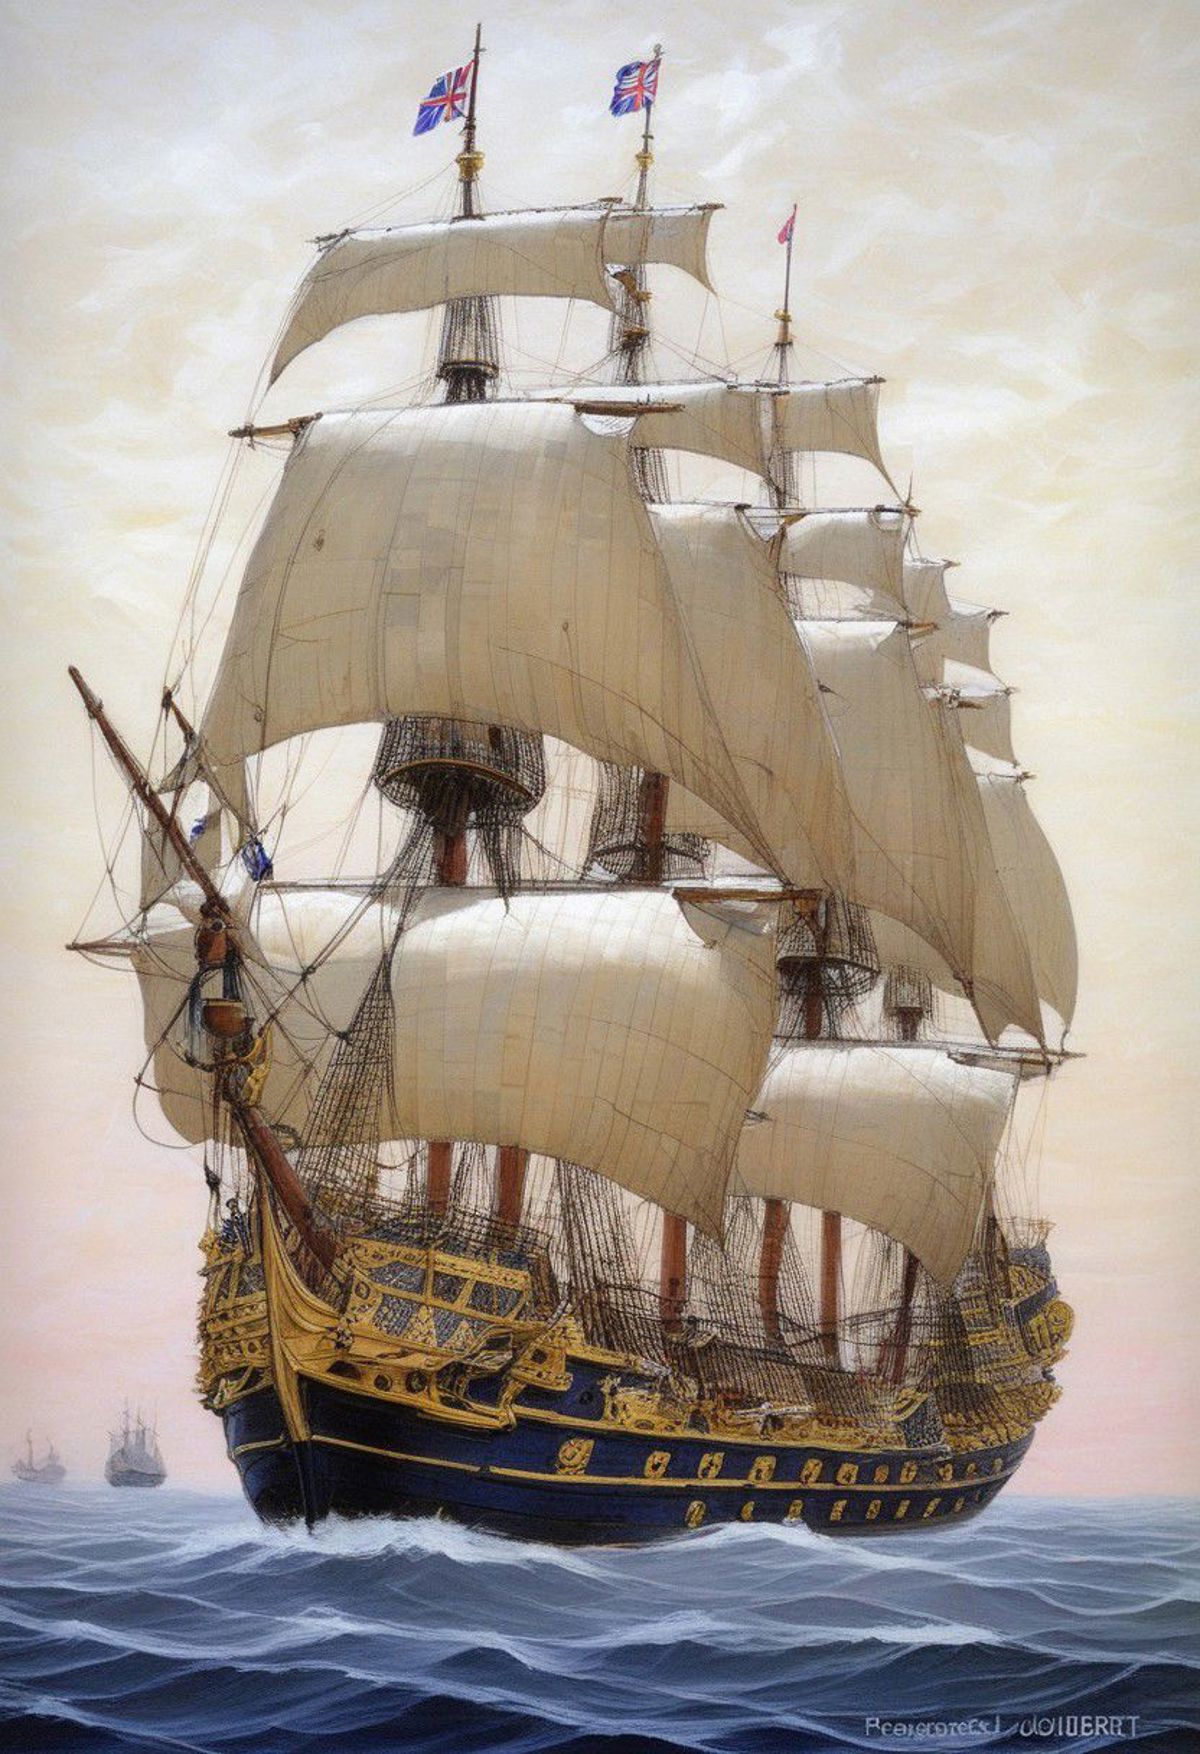 A large blue and white sailboat with several masts and sails in a painting.